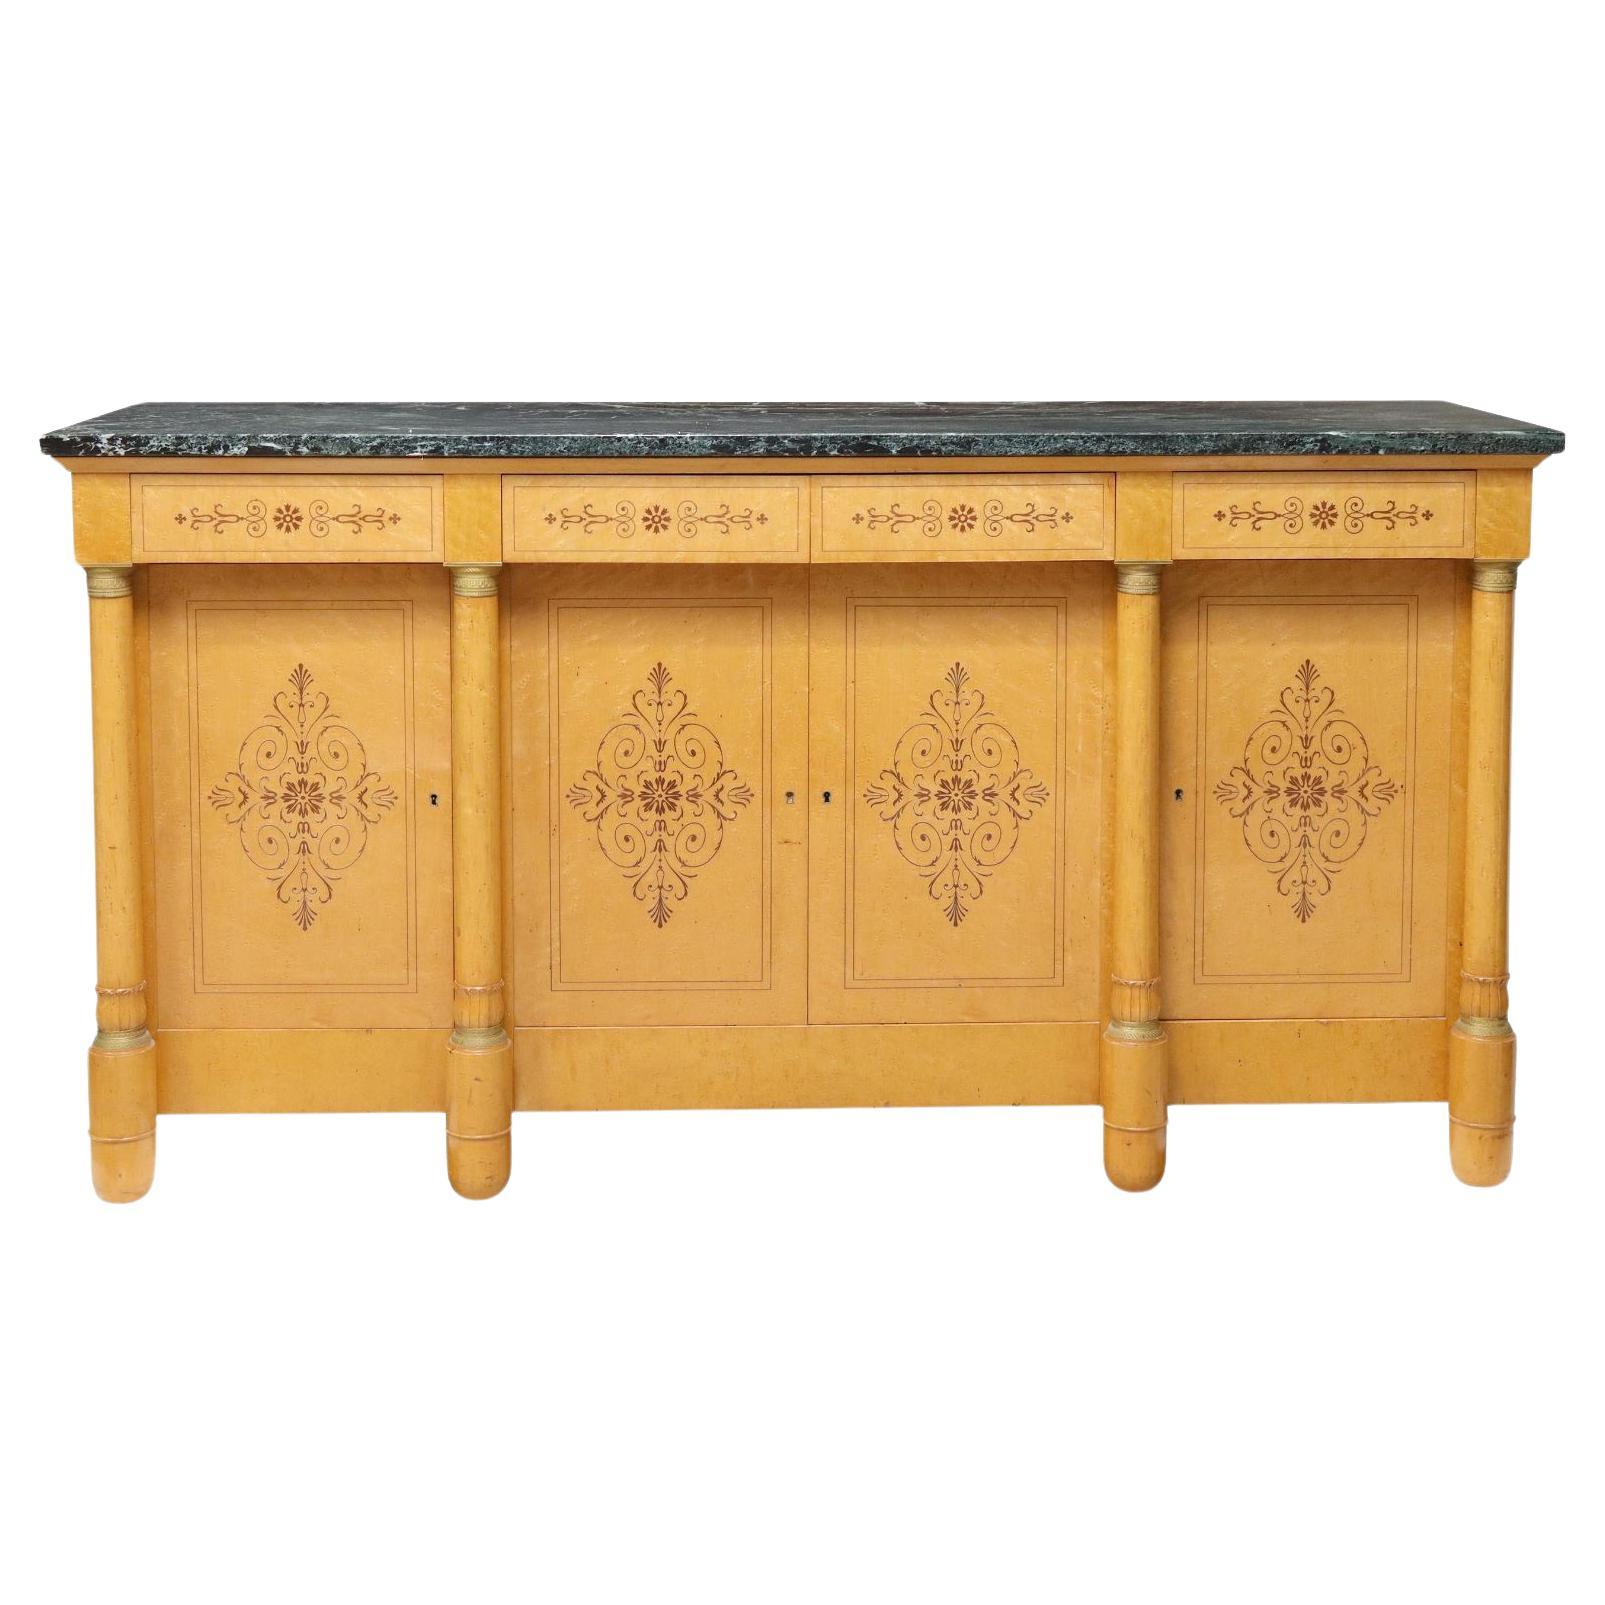 Vintage French Empire Style Green Marble-Top Birdseye Maple Sideboard For Sale